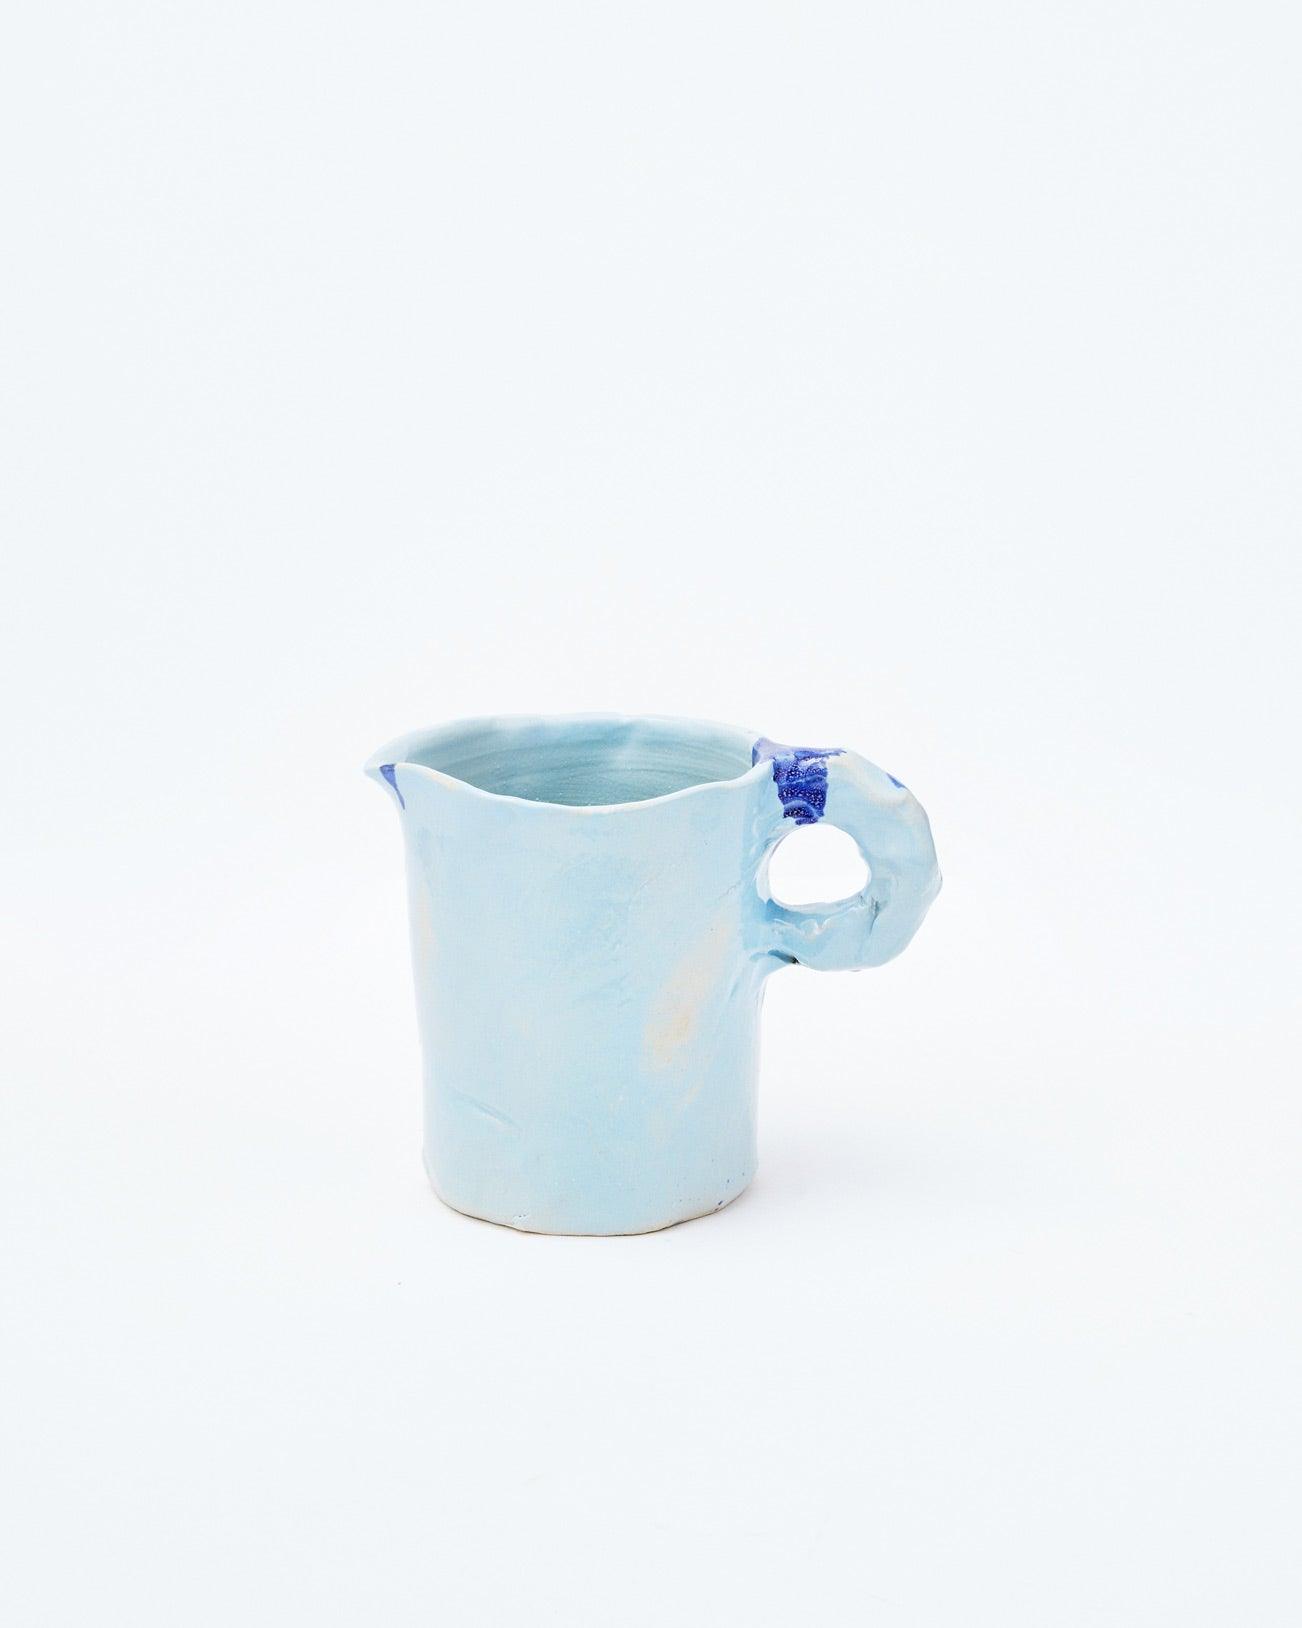 Light blue modern ceramic pitcher with left-handed handle on a white background